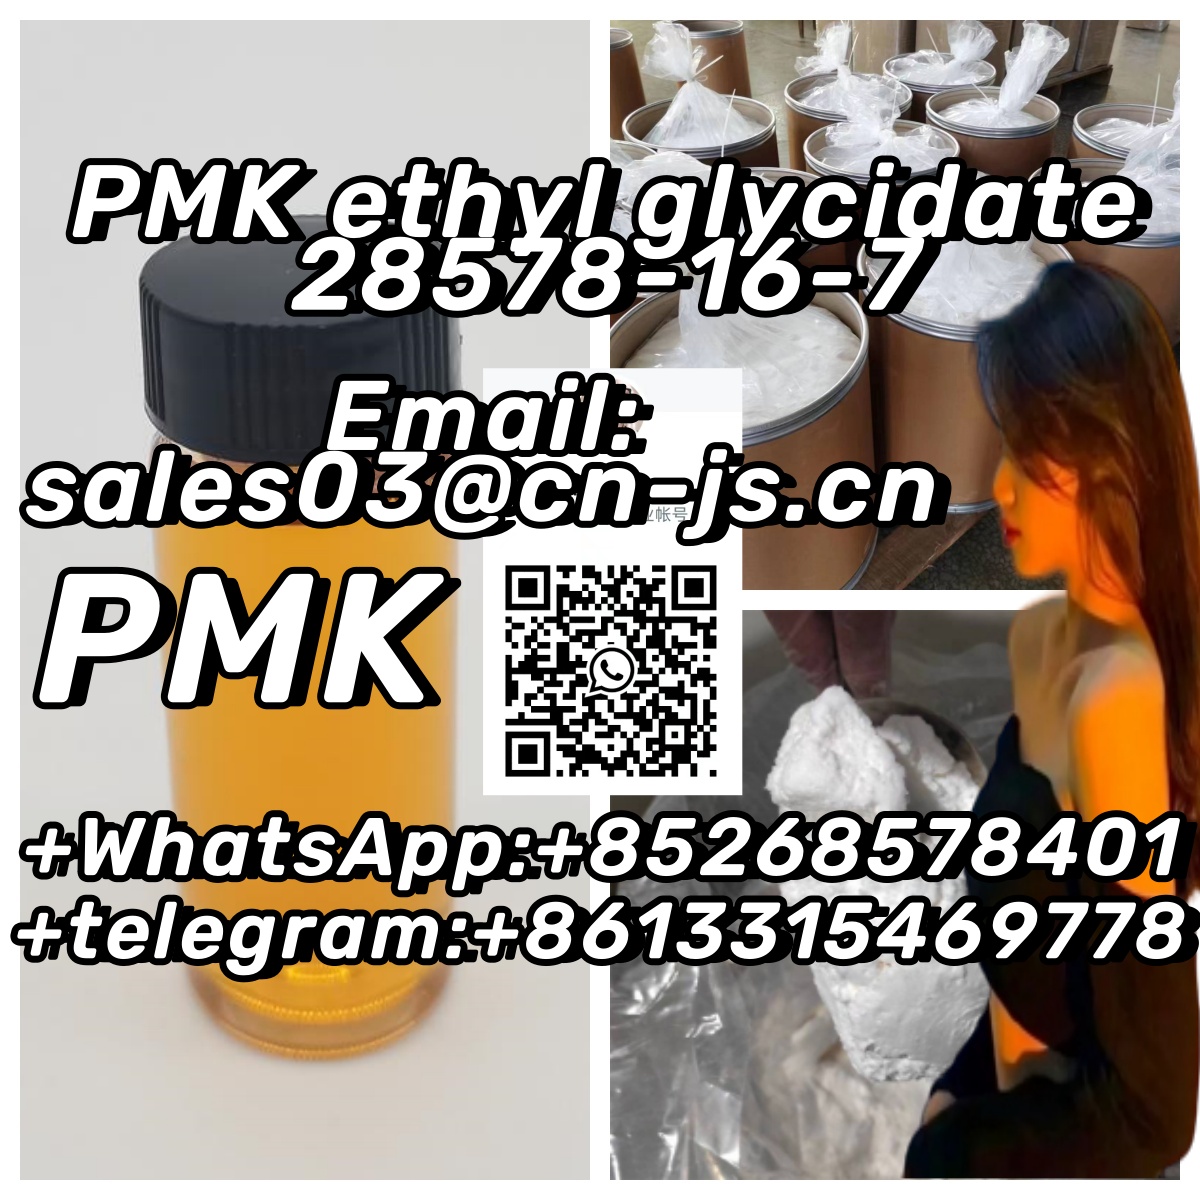 PMK（new PMK Oil）,shijiazhuang,Business,Business For Sale,77traders